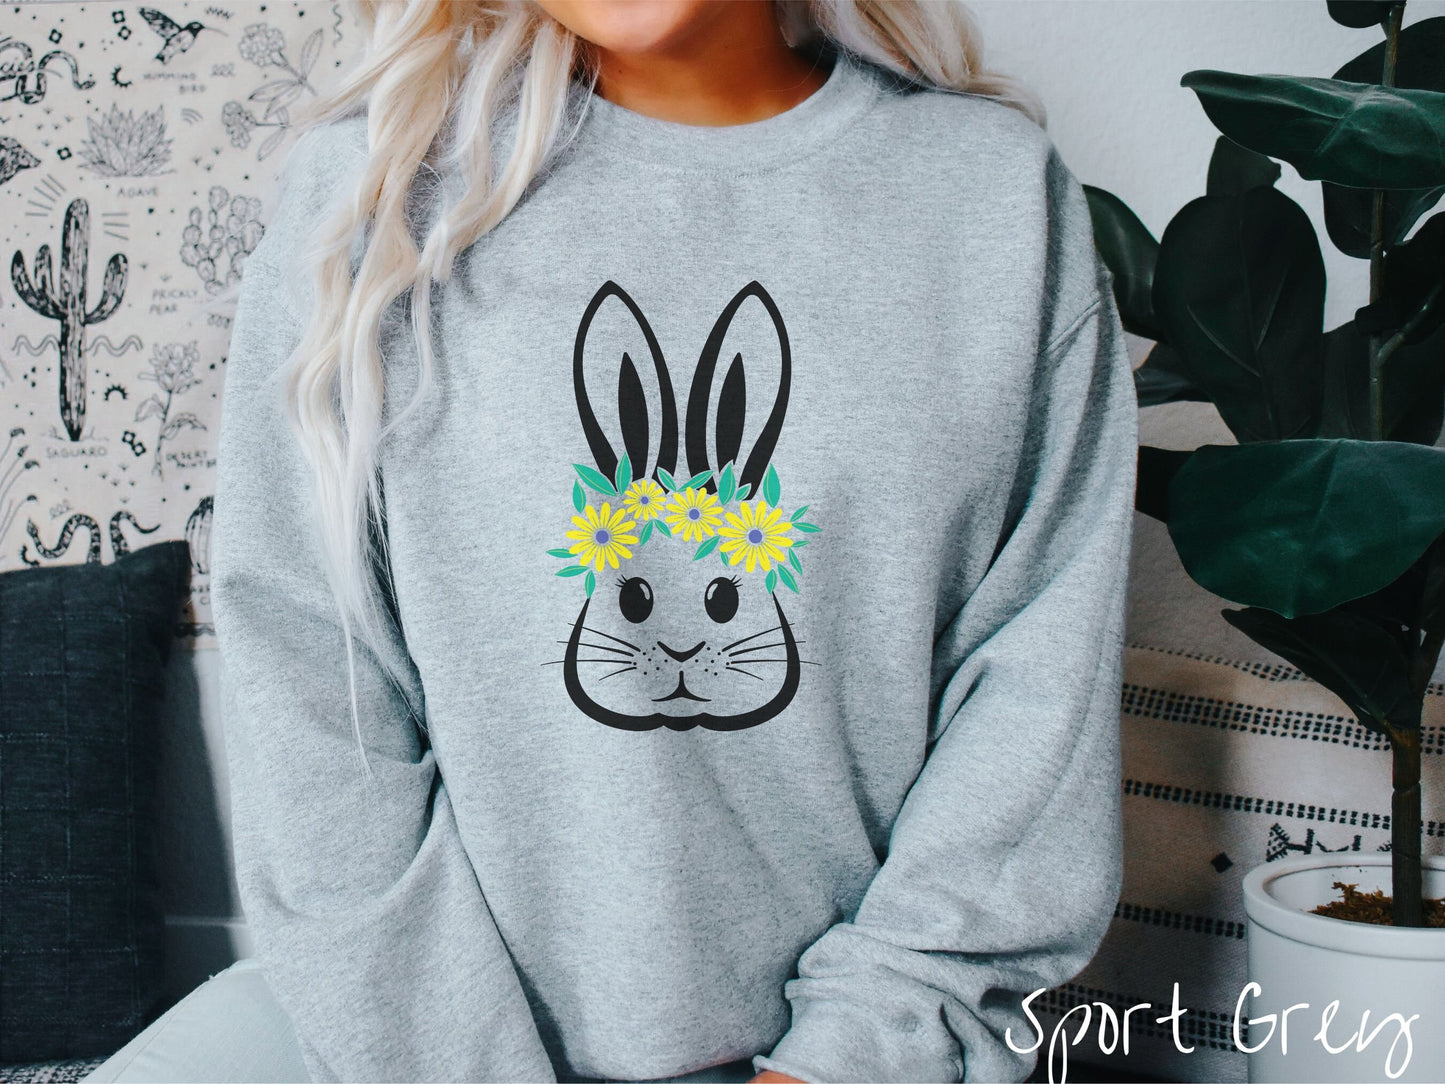 A woman wearing a cute, vintage sport grey colored sweatshirt with a black outline of a bunny rabbit with eyelashes and whiskers that has a yellow and purple flower headband resting below its large ears.